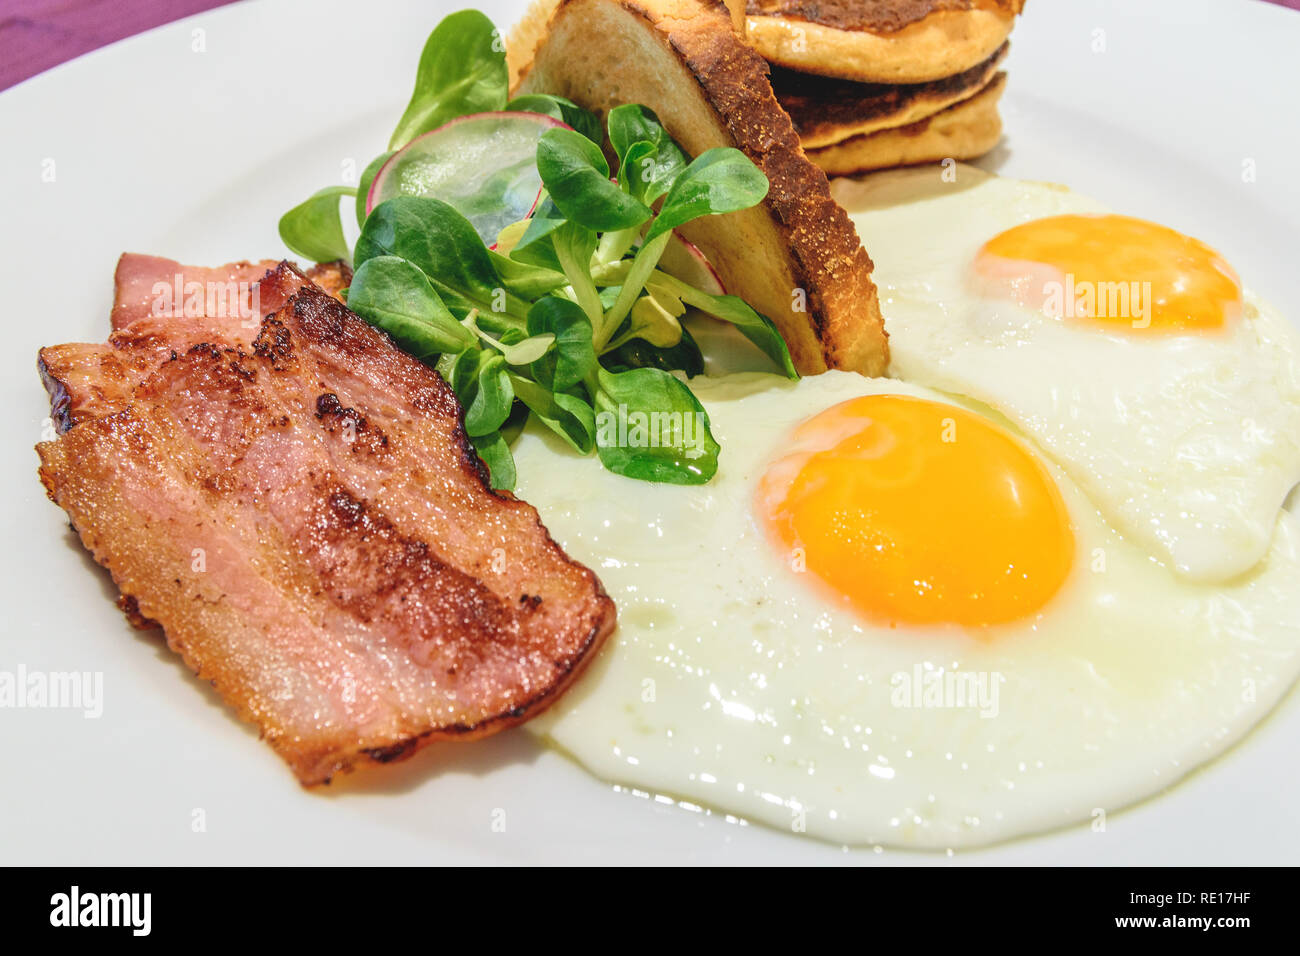 American breakfast with sunny side up eggs, bacon and french toast, close up photo. Stock Photo